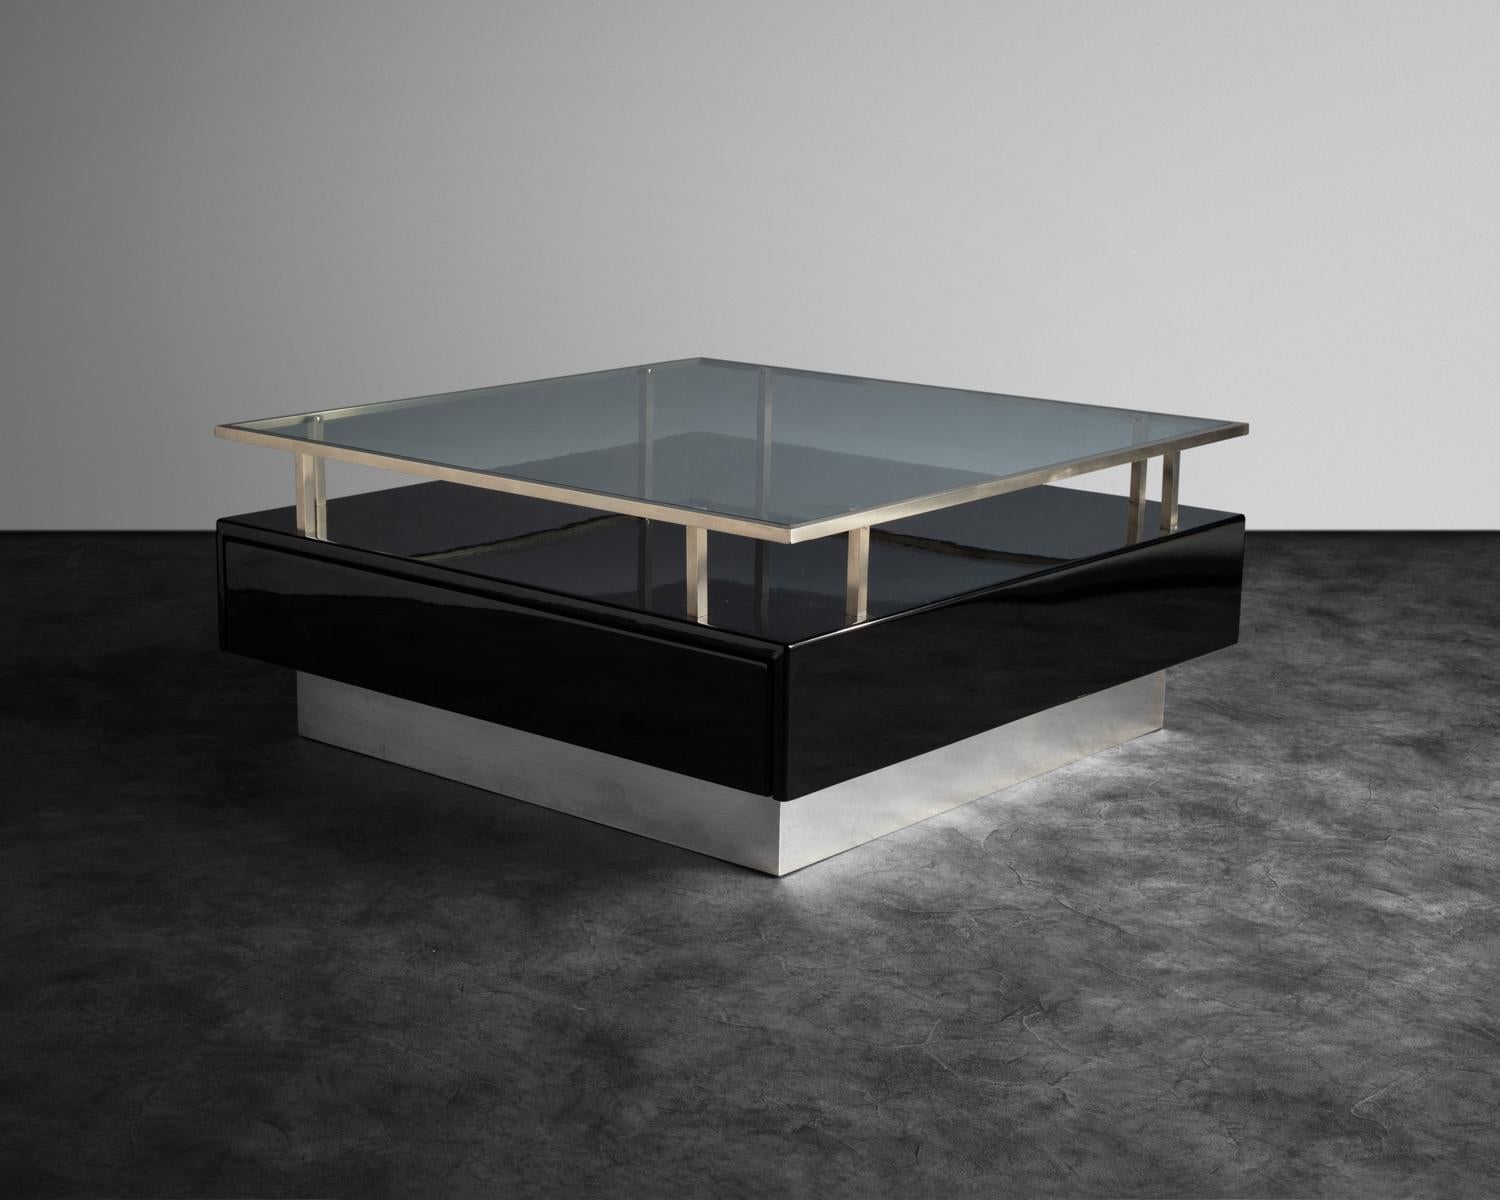 Square black lacquered tables with a raised aluminum frame supporting a glass top. The table bases feature a divided drawer.
 